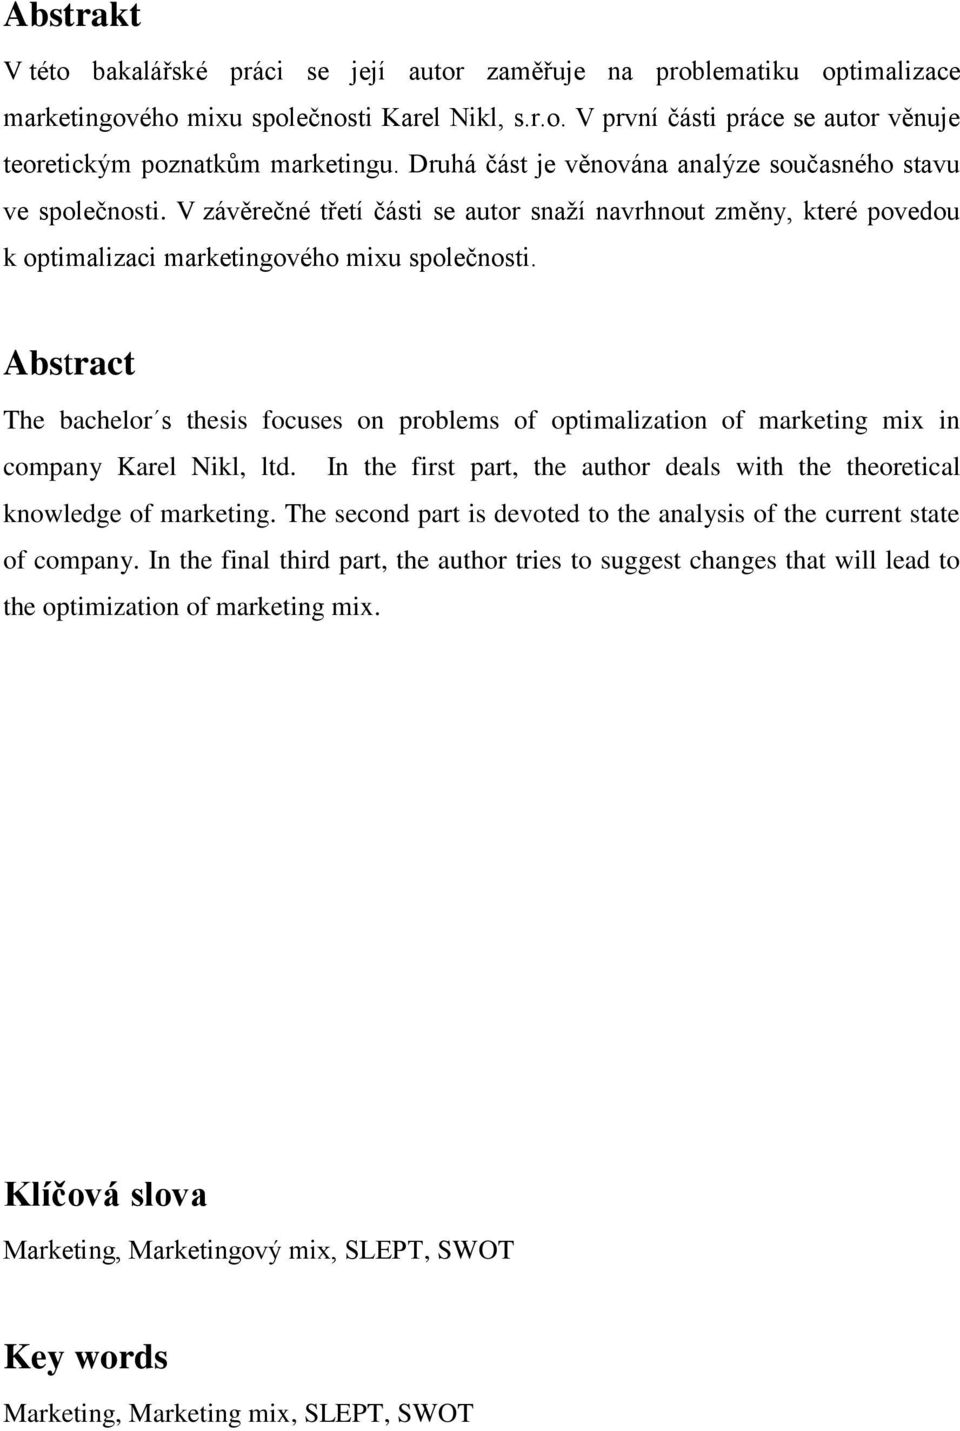 Abstract The bachelor s thesis focuses on problems of optimalization of marketing mix in company Karel Nikl, ltd. In the first part, the author deals with the theoretical knowledge of marketing.